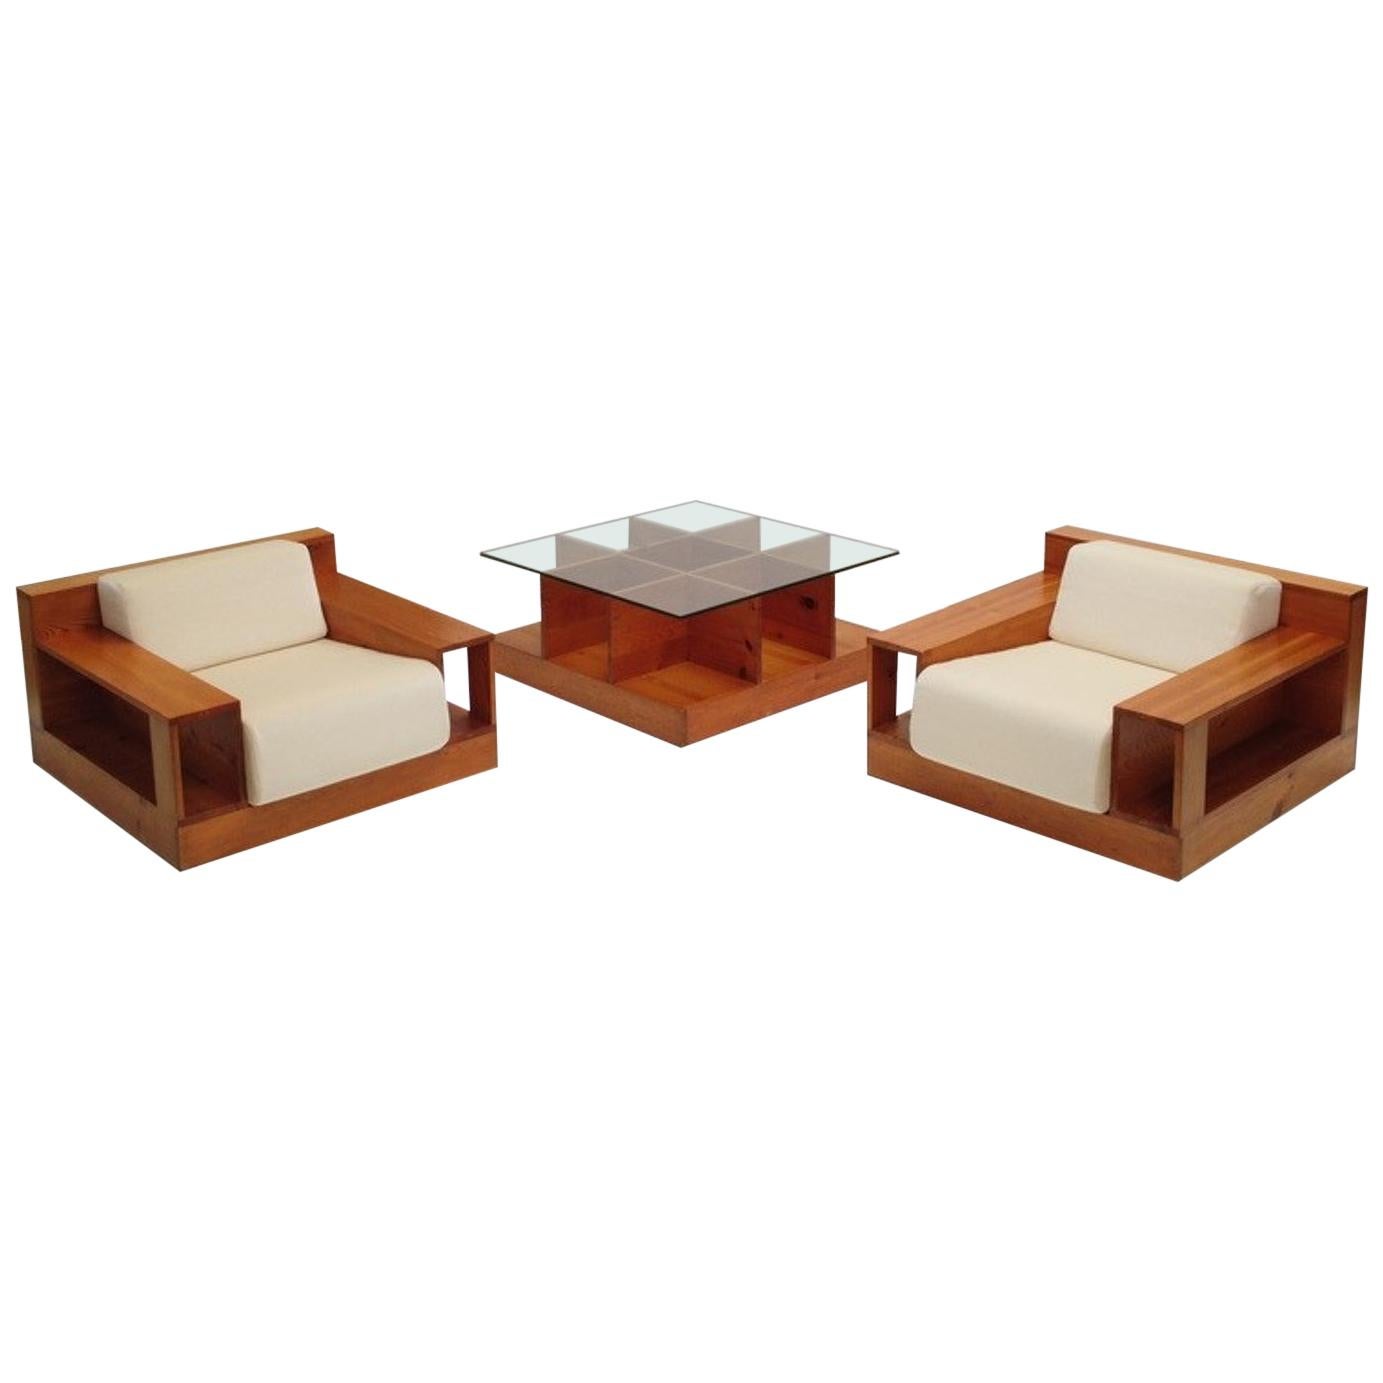 Pinewood and Mohair Lounge Chairs and Table by Gianfranco Fini, Poltronova, 1974